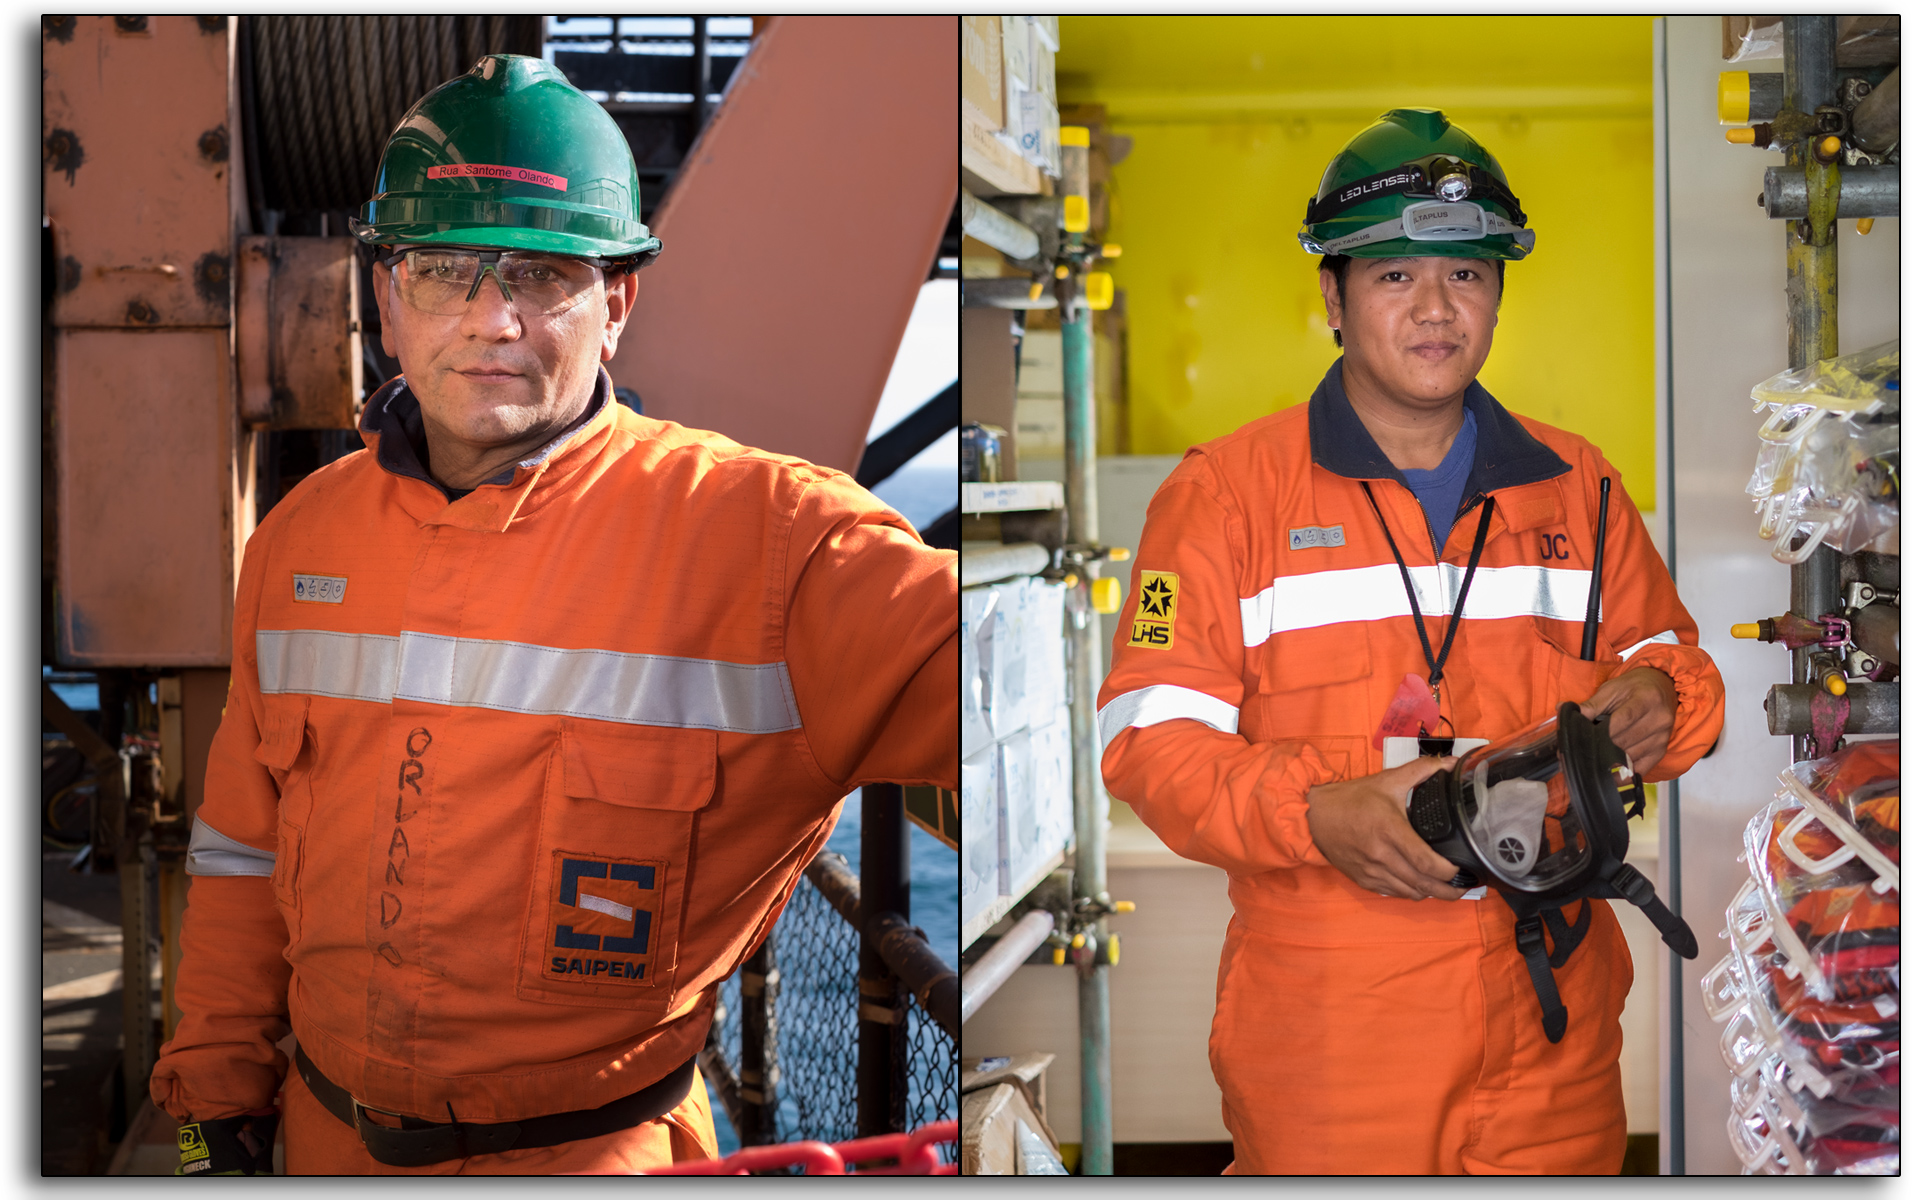 offshore, Saipem, north sea, BP Miller, decommissioning, store man, fitter, employees, workers, industrial photography, reportage, documentary, lee ramsden.jpg